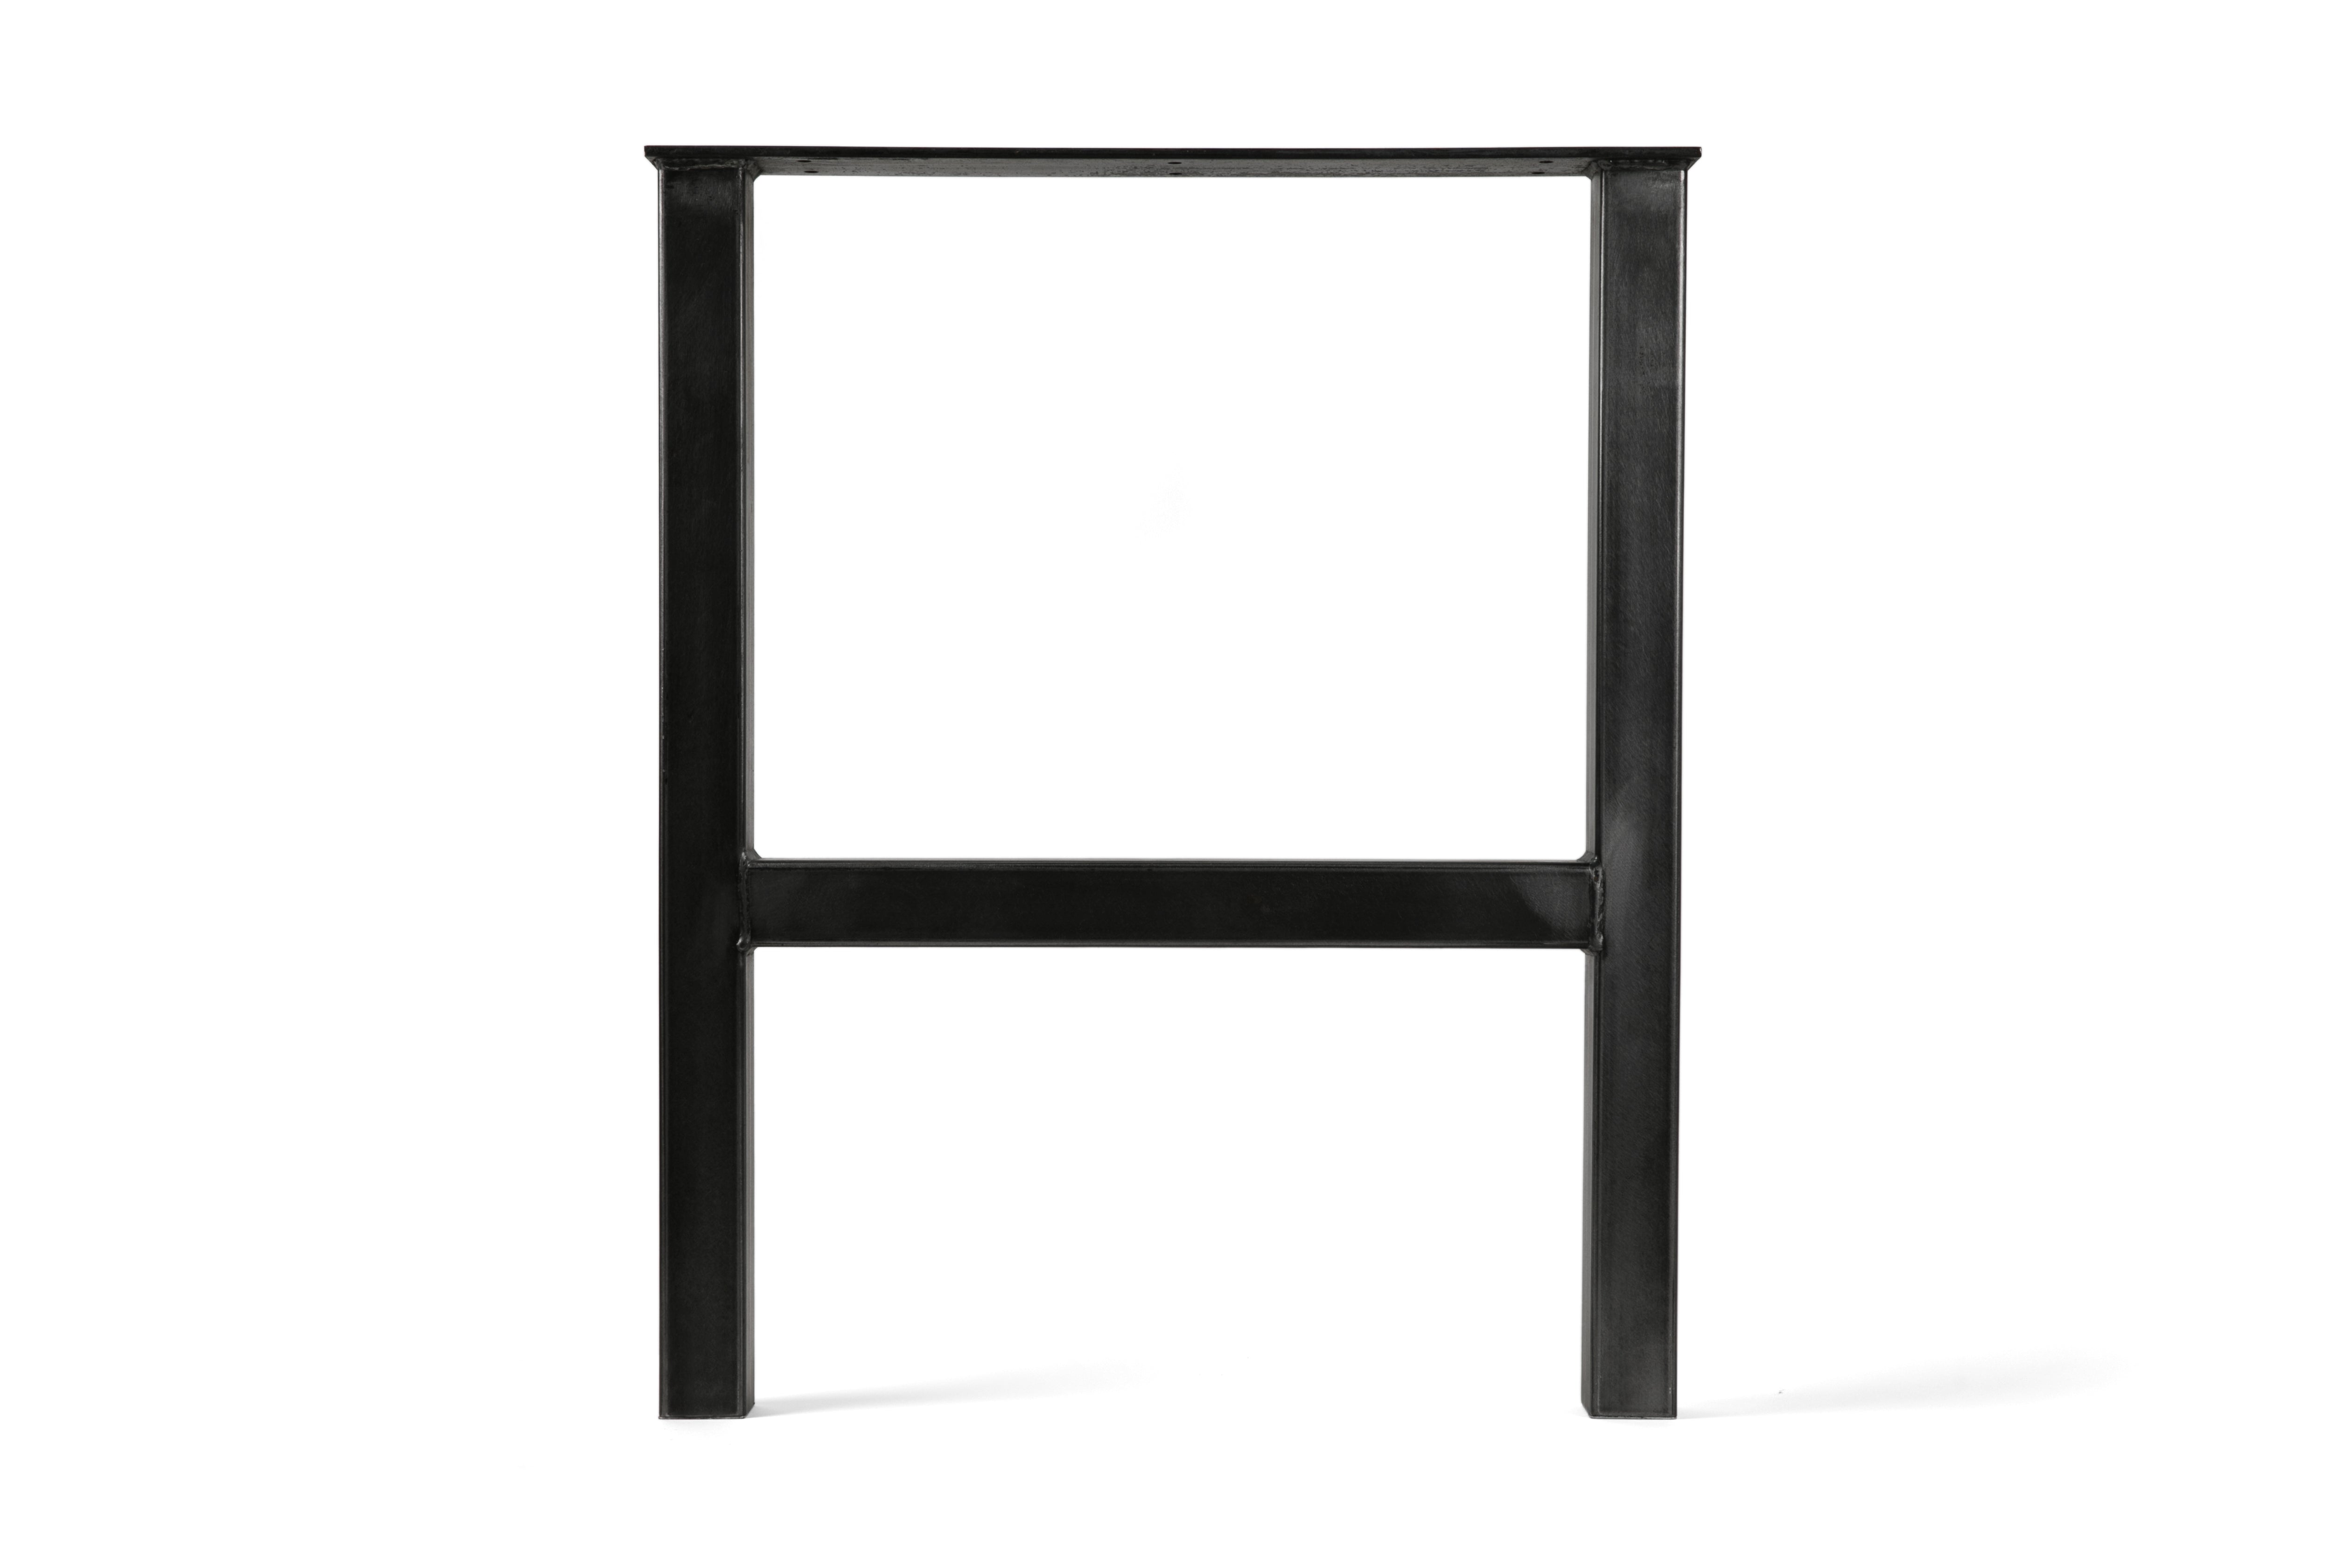 Metal H-Block Table Legs made in the USA by Carolina Leg Co